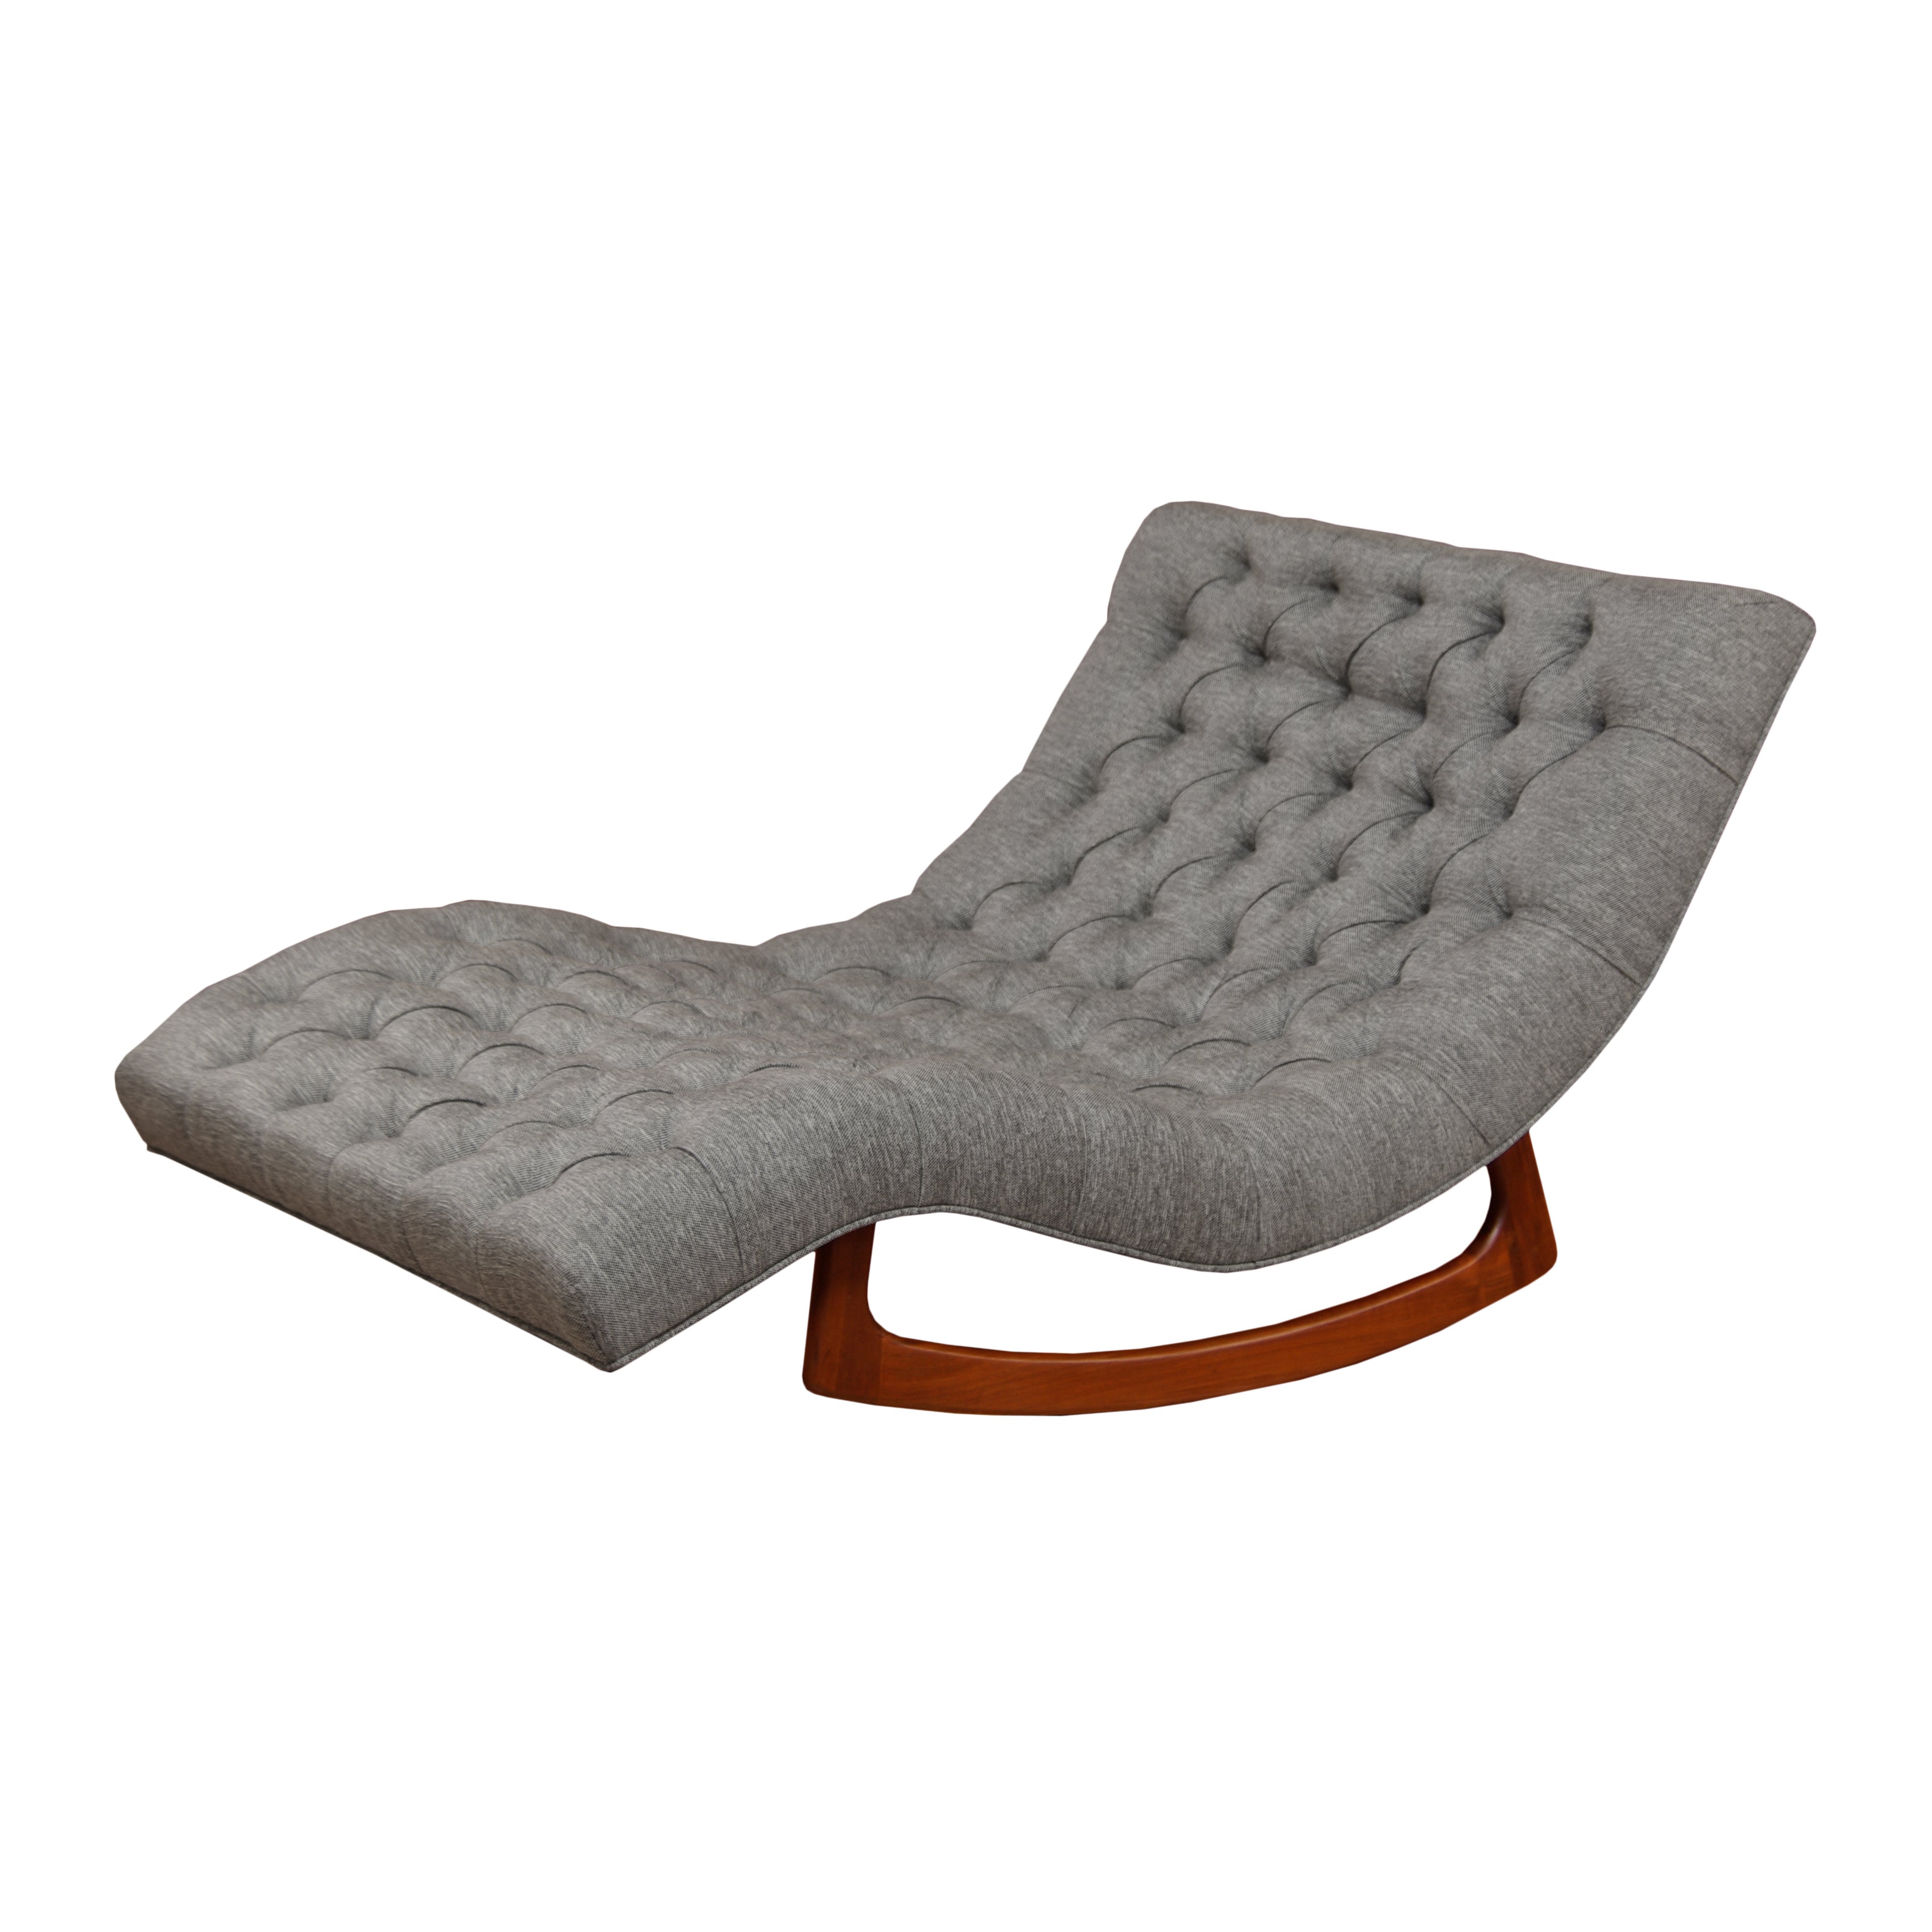 Craft Associates Chaise Lounge by Adrian Pearsall